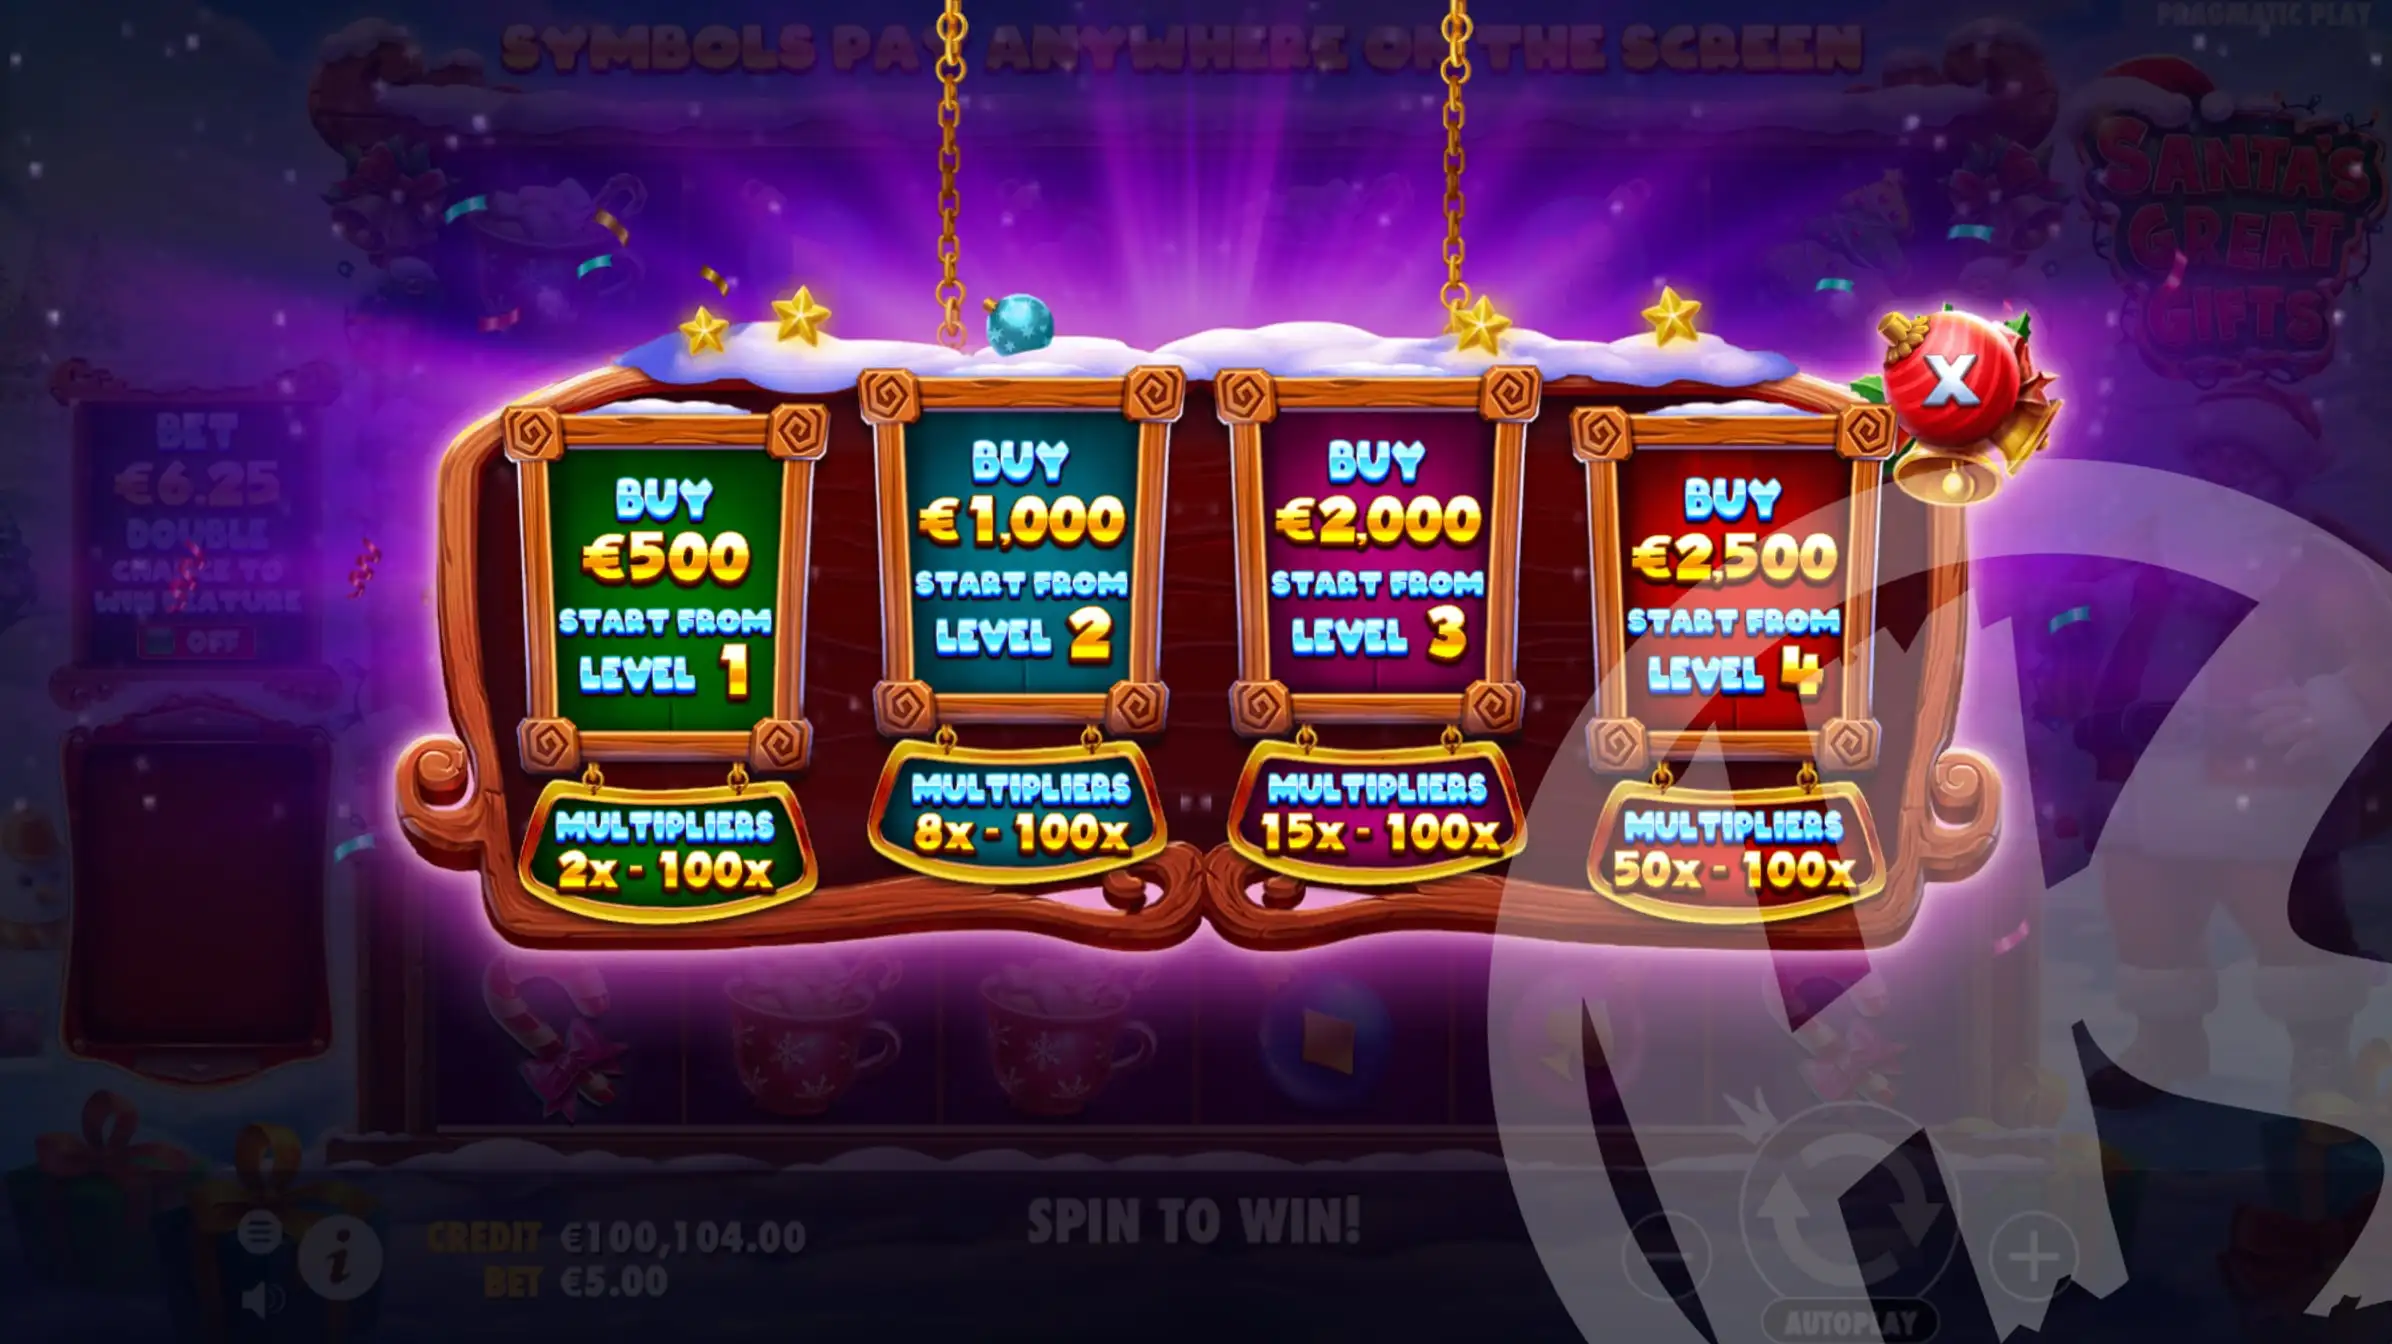 Santa's Great Gifts Buy Free Spins Options